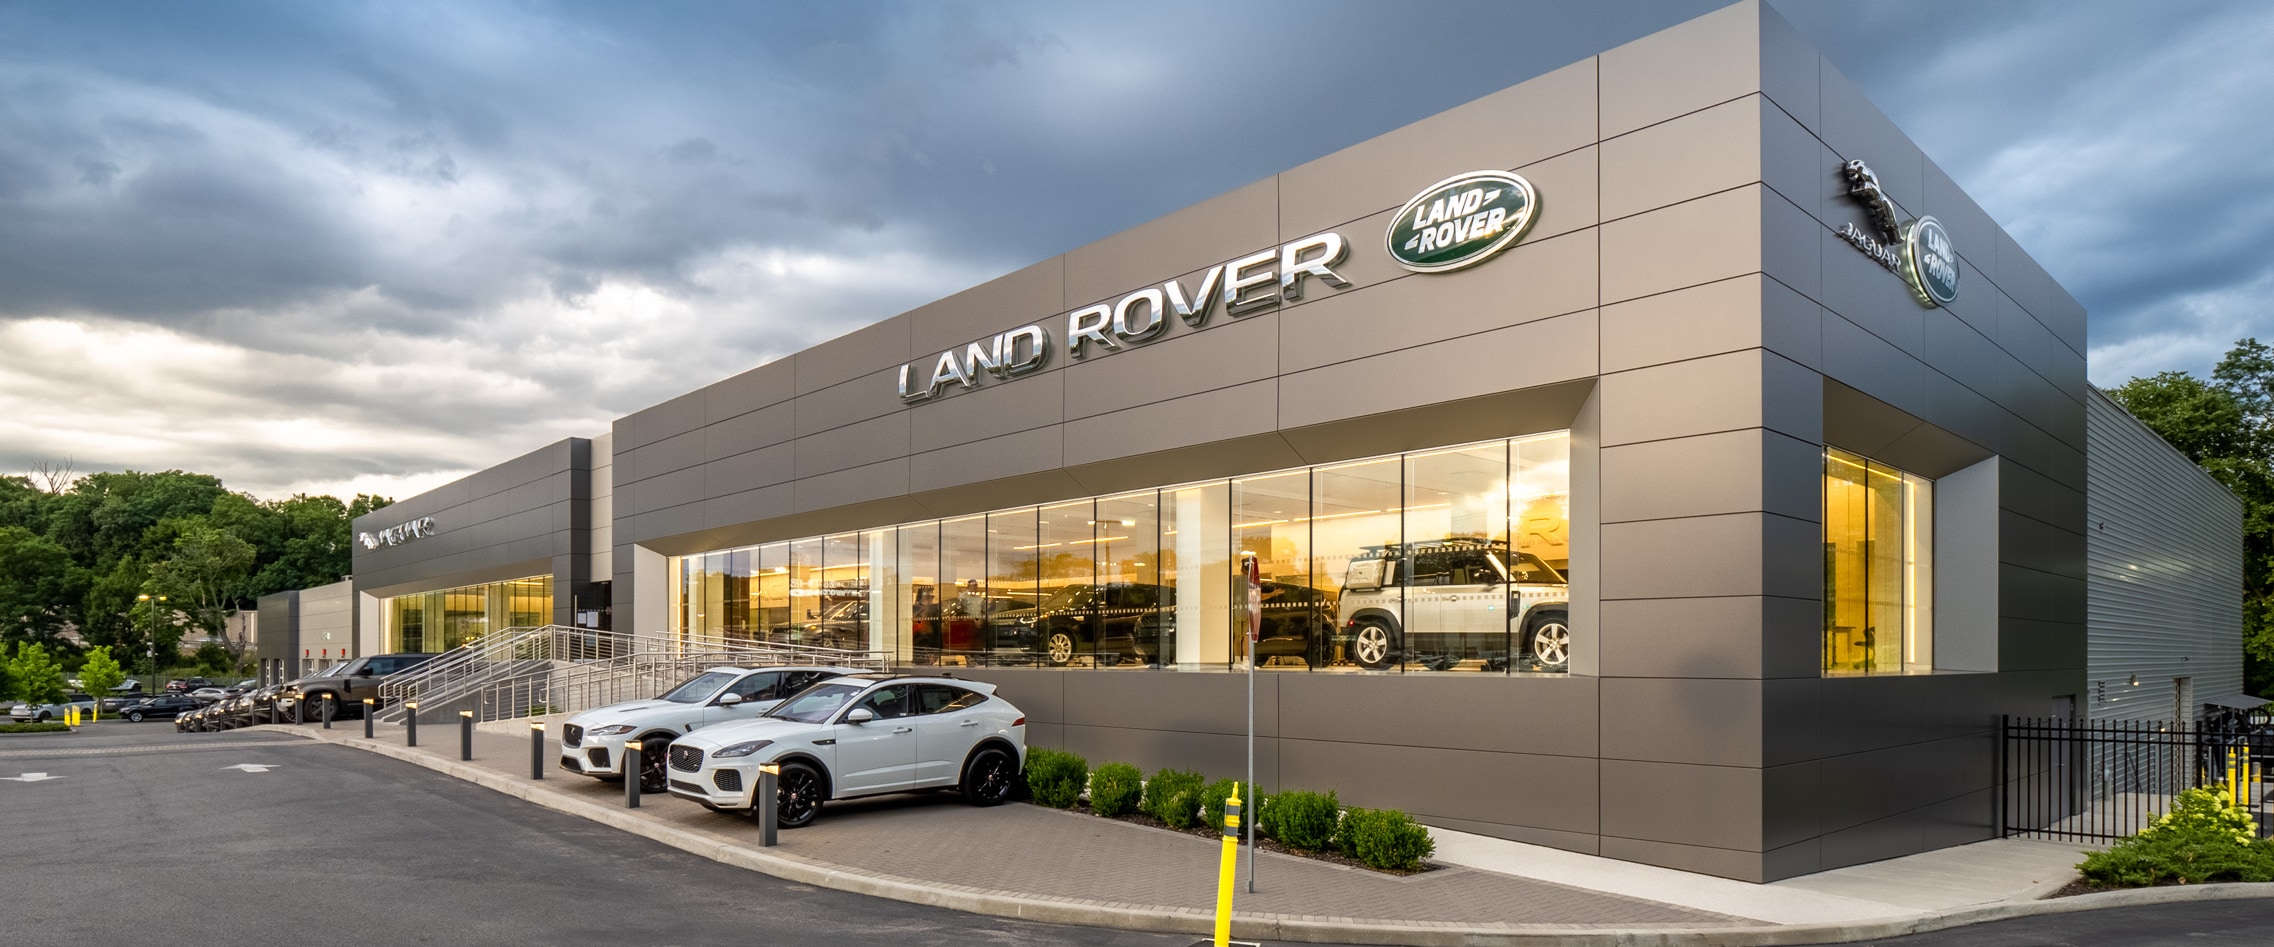 Exterior view of Land Rover White Plains